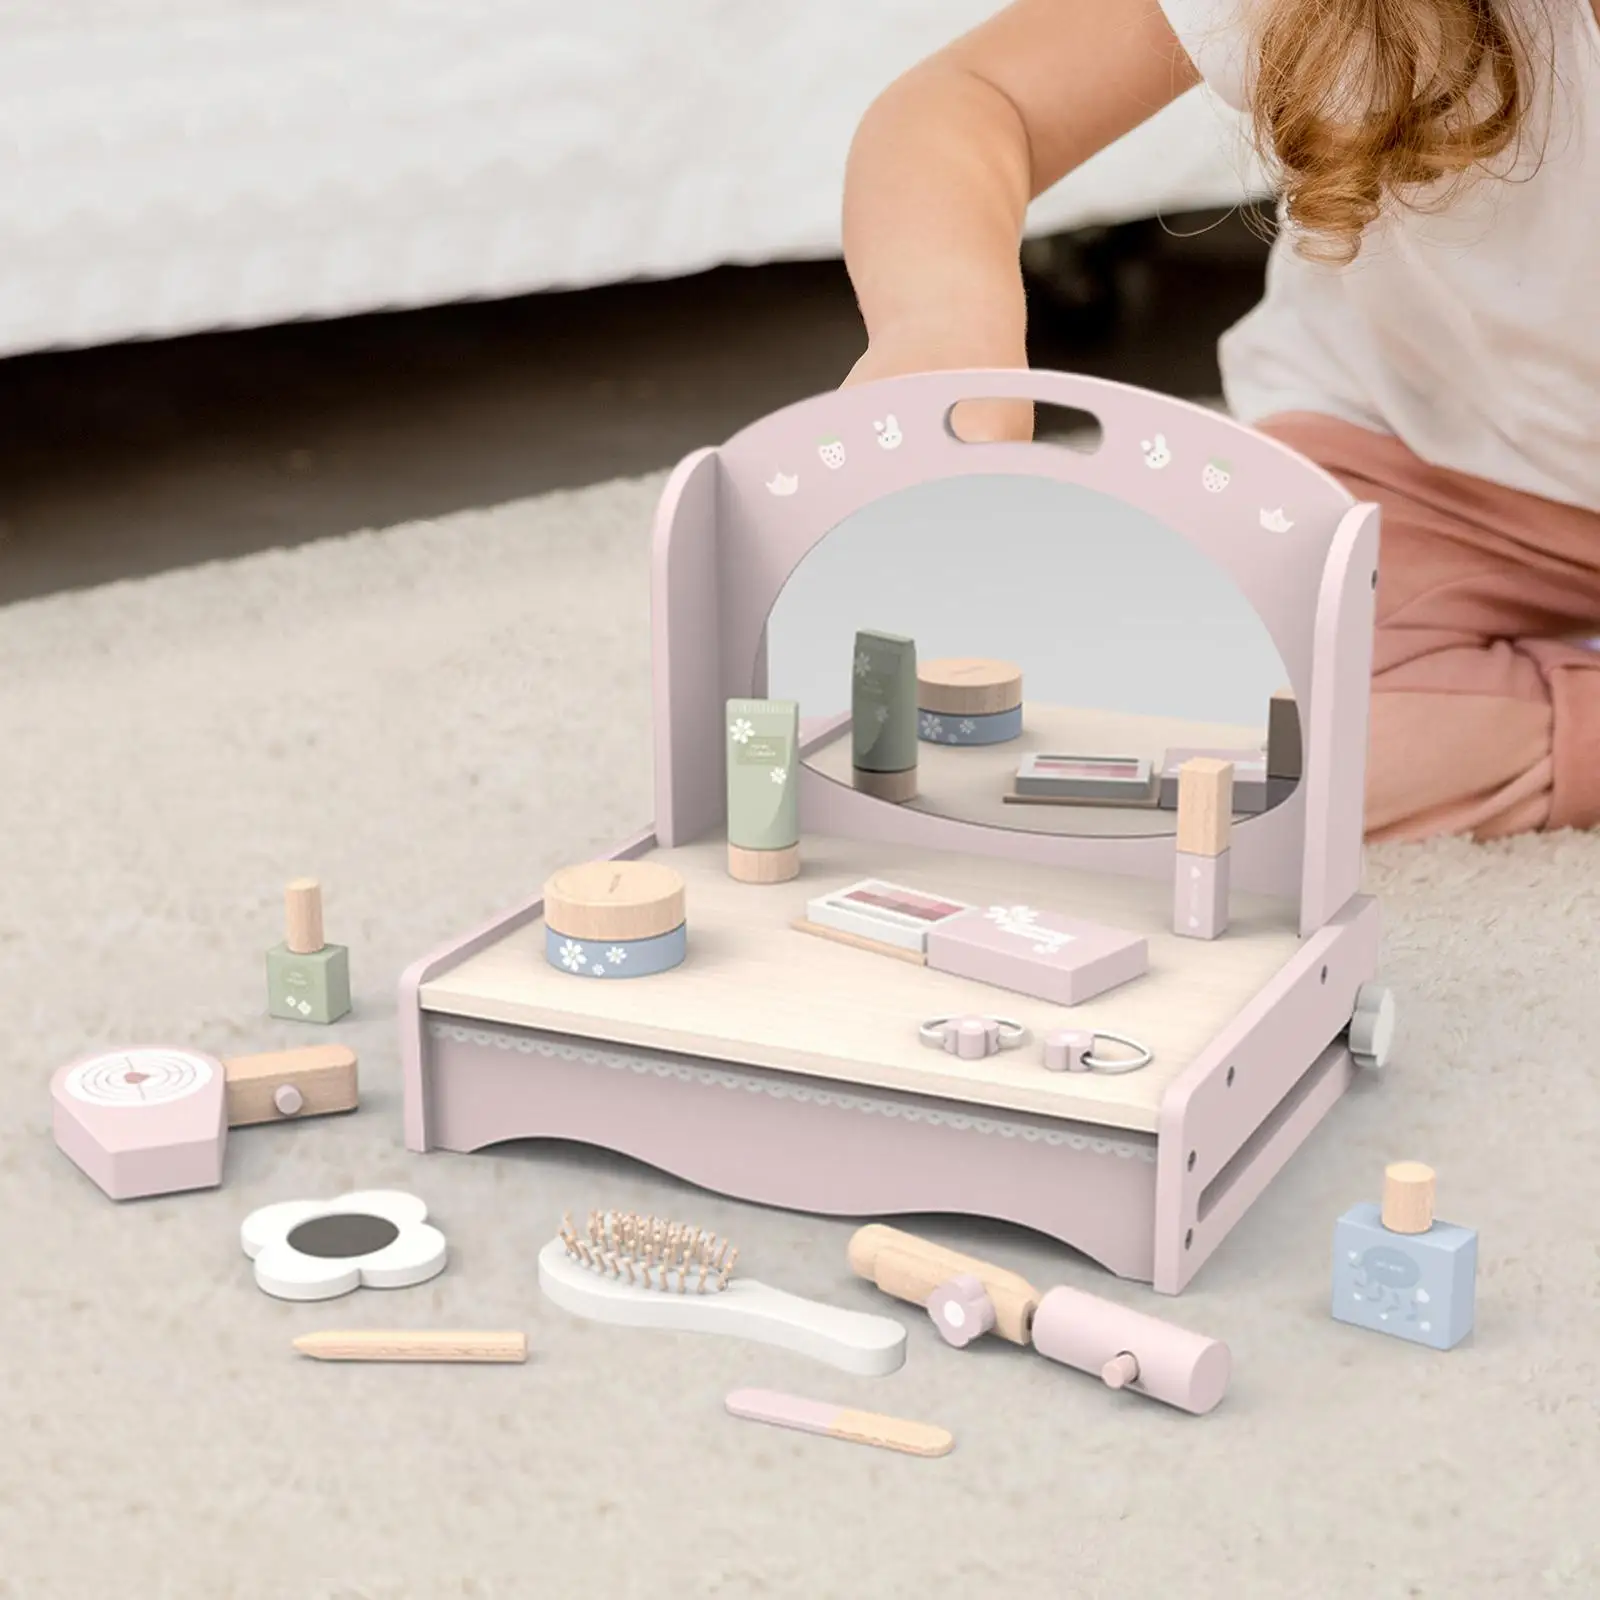 Potable Kids Makeup Sets Kids vanity Table Simulation Play Room Pretend Play Makeup Toy dress Table Toy for Game Gift